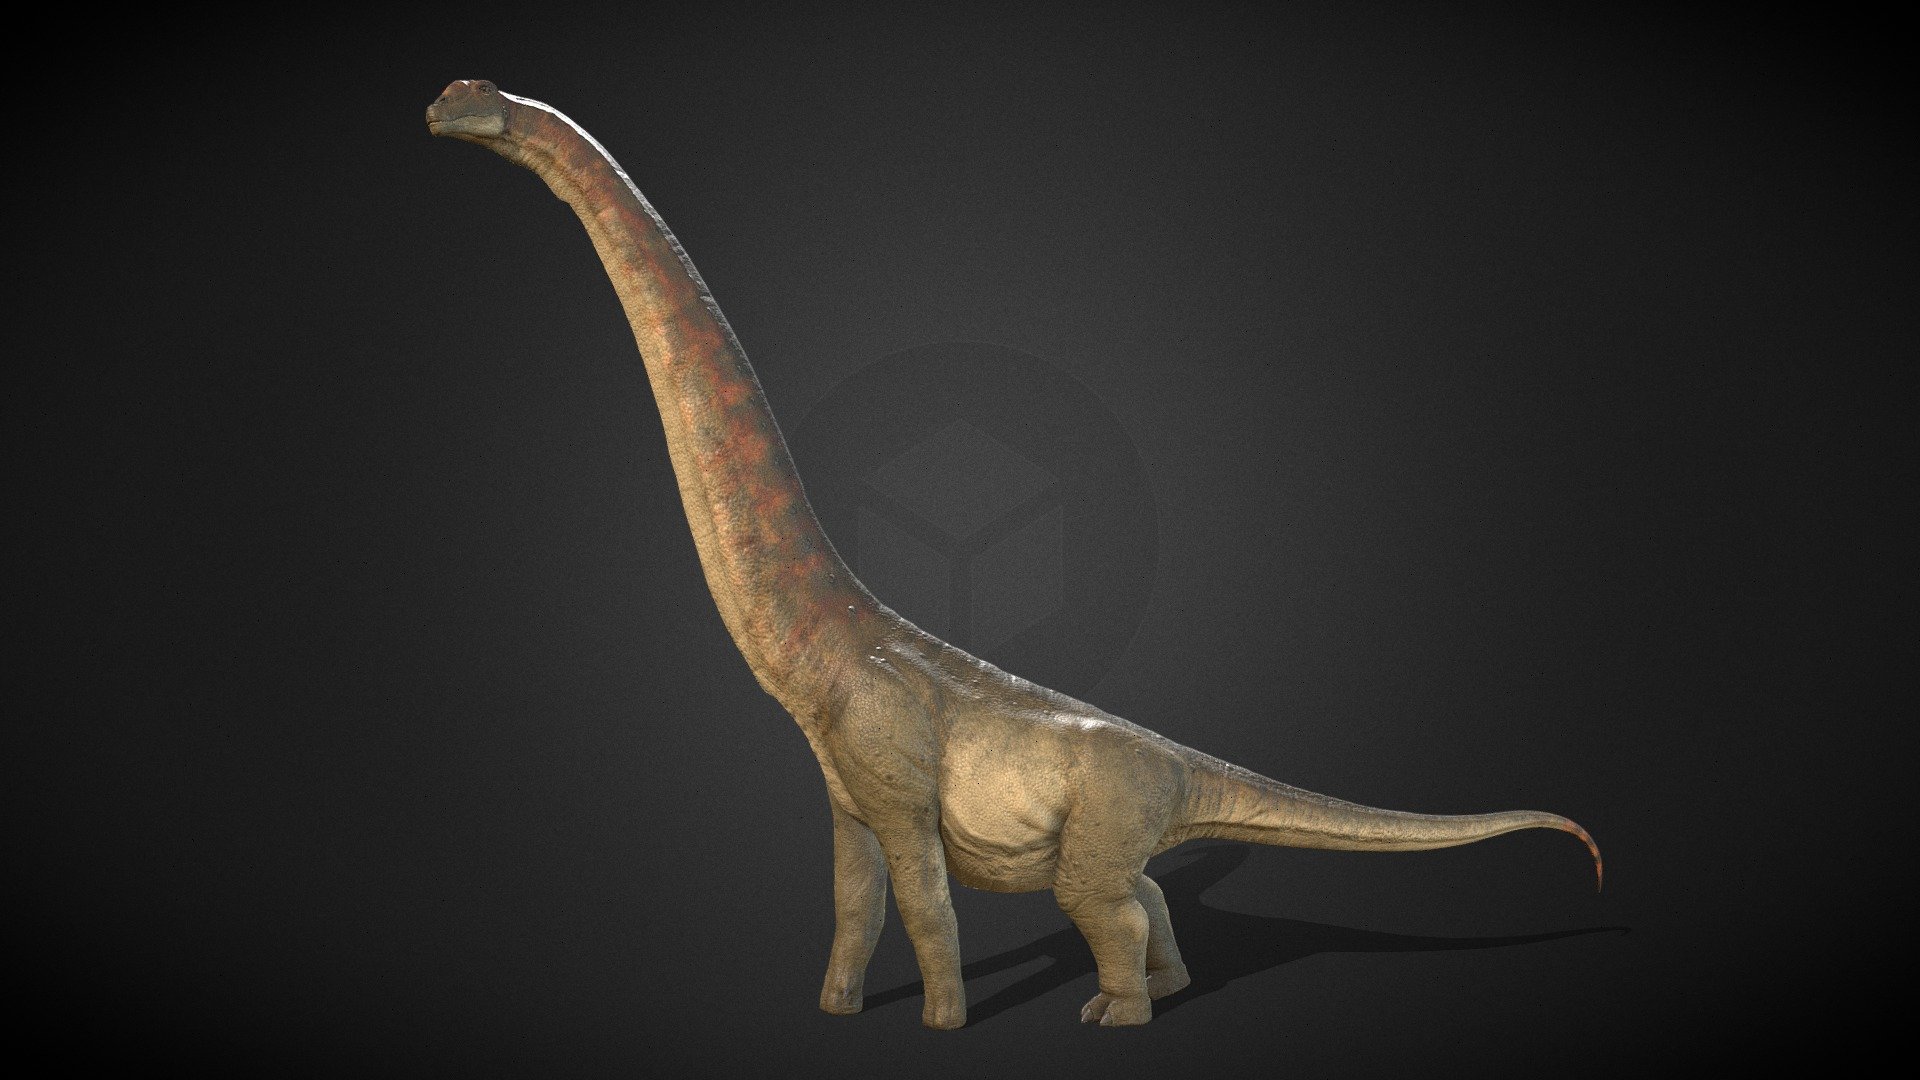 Argentinosaurus model inspired by Prehistoric Planet's Dreadnoughtus. It was my favorite show of last year and the Dreadnoughtus scene is up there as my favorite segment of the documentary. I urge anyone who haven't seen it to give it a watch, it is the brilliance and the representation that paleontology needed in main-stream media.

Made with Blender and Substance Painter.

Comes with 2 Level of Details available, Rigging and High-quality PBR 8K textures. Suitable for both game-asset, and cinematic animation.

The native file type is BLEND as it was created with Blender, however with OBJ, FBX as well as PBR textures provided, it will work with any 3D programs.

In this package includes:





Blender file (.BLEND) with armature rigging, proper materials and PBR textures set up.




PBR textures in 8K, including these maps: Color, Roughness, Normal map. Skins include Male and Female version.




OBJ and FBX files. 



Thank you for your support of my models and look out for more soon 3d model